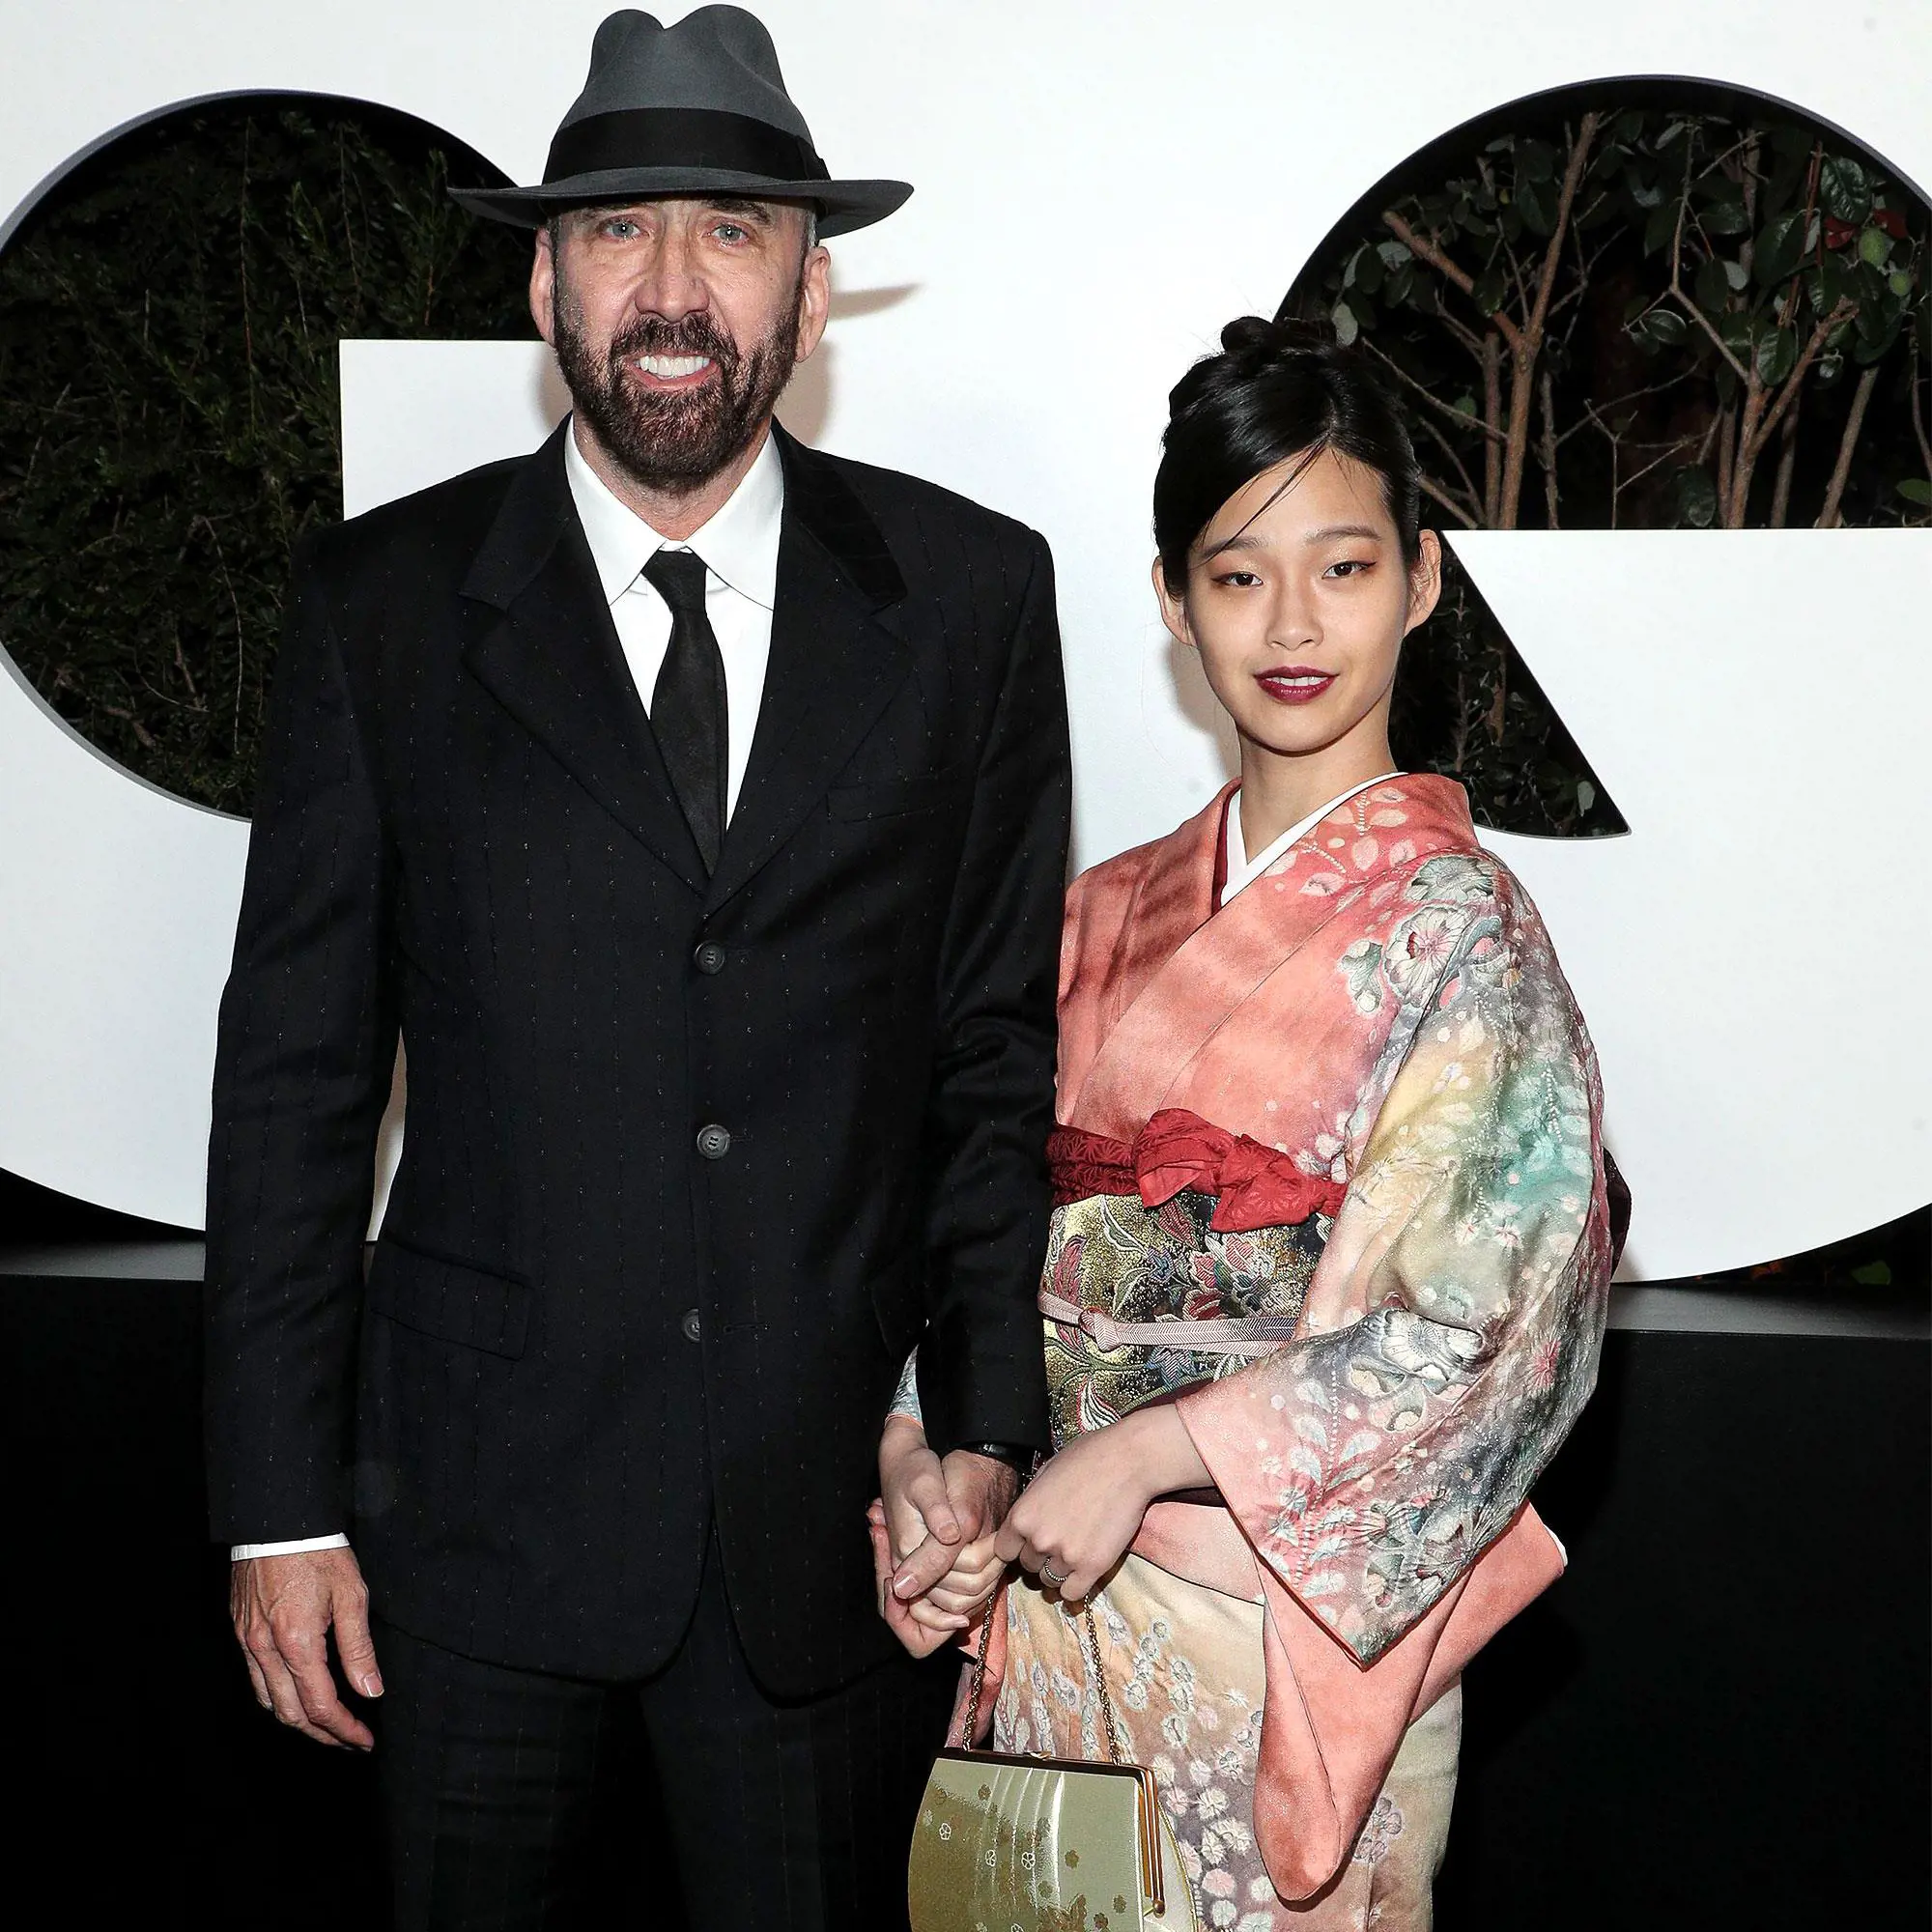 Nicolas and Riko At The GQ Men Of The Year Celebrations (Image Source: Getty/ Phillip Faraone)